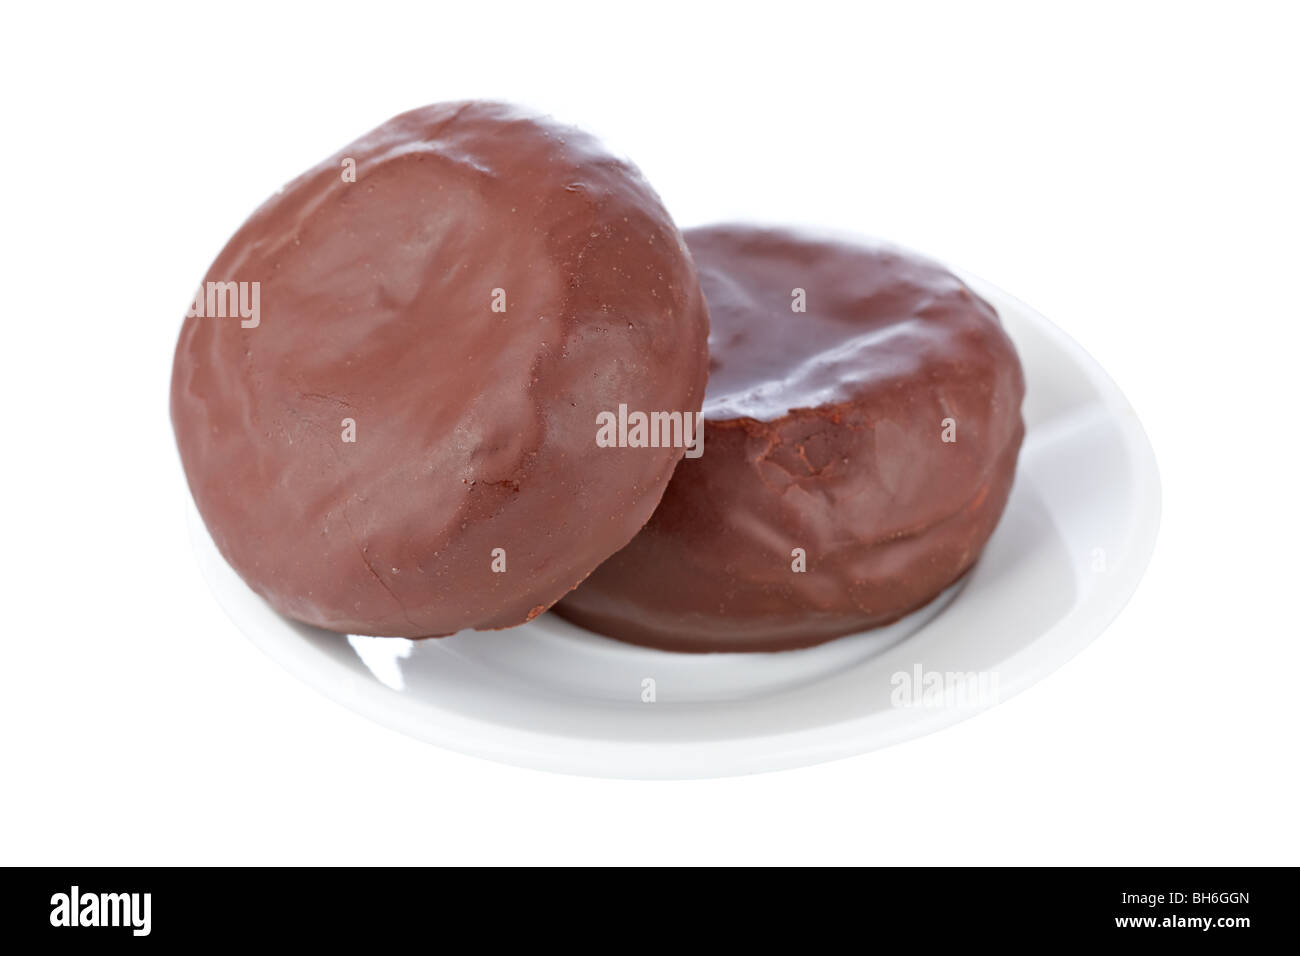 Two delicious chocolate donuts on a dish isolated on white background with shallow depth of field Stock Photo